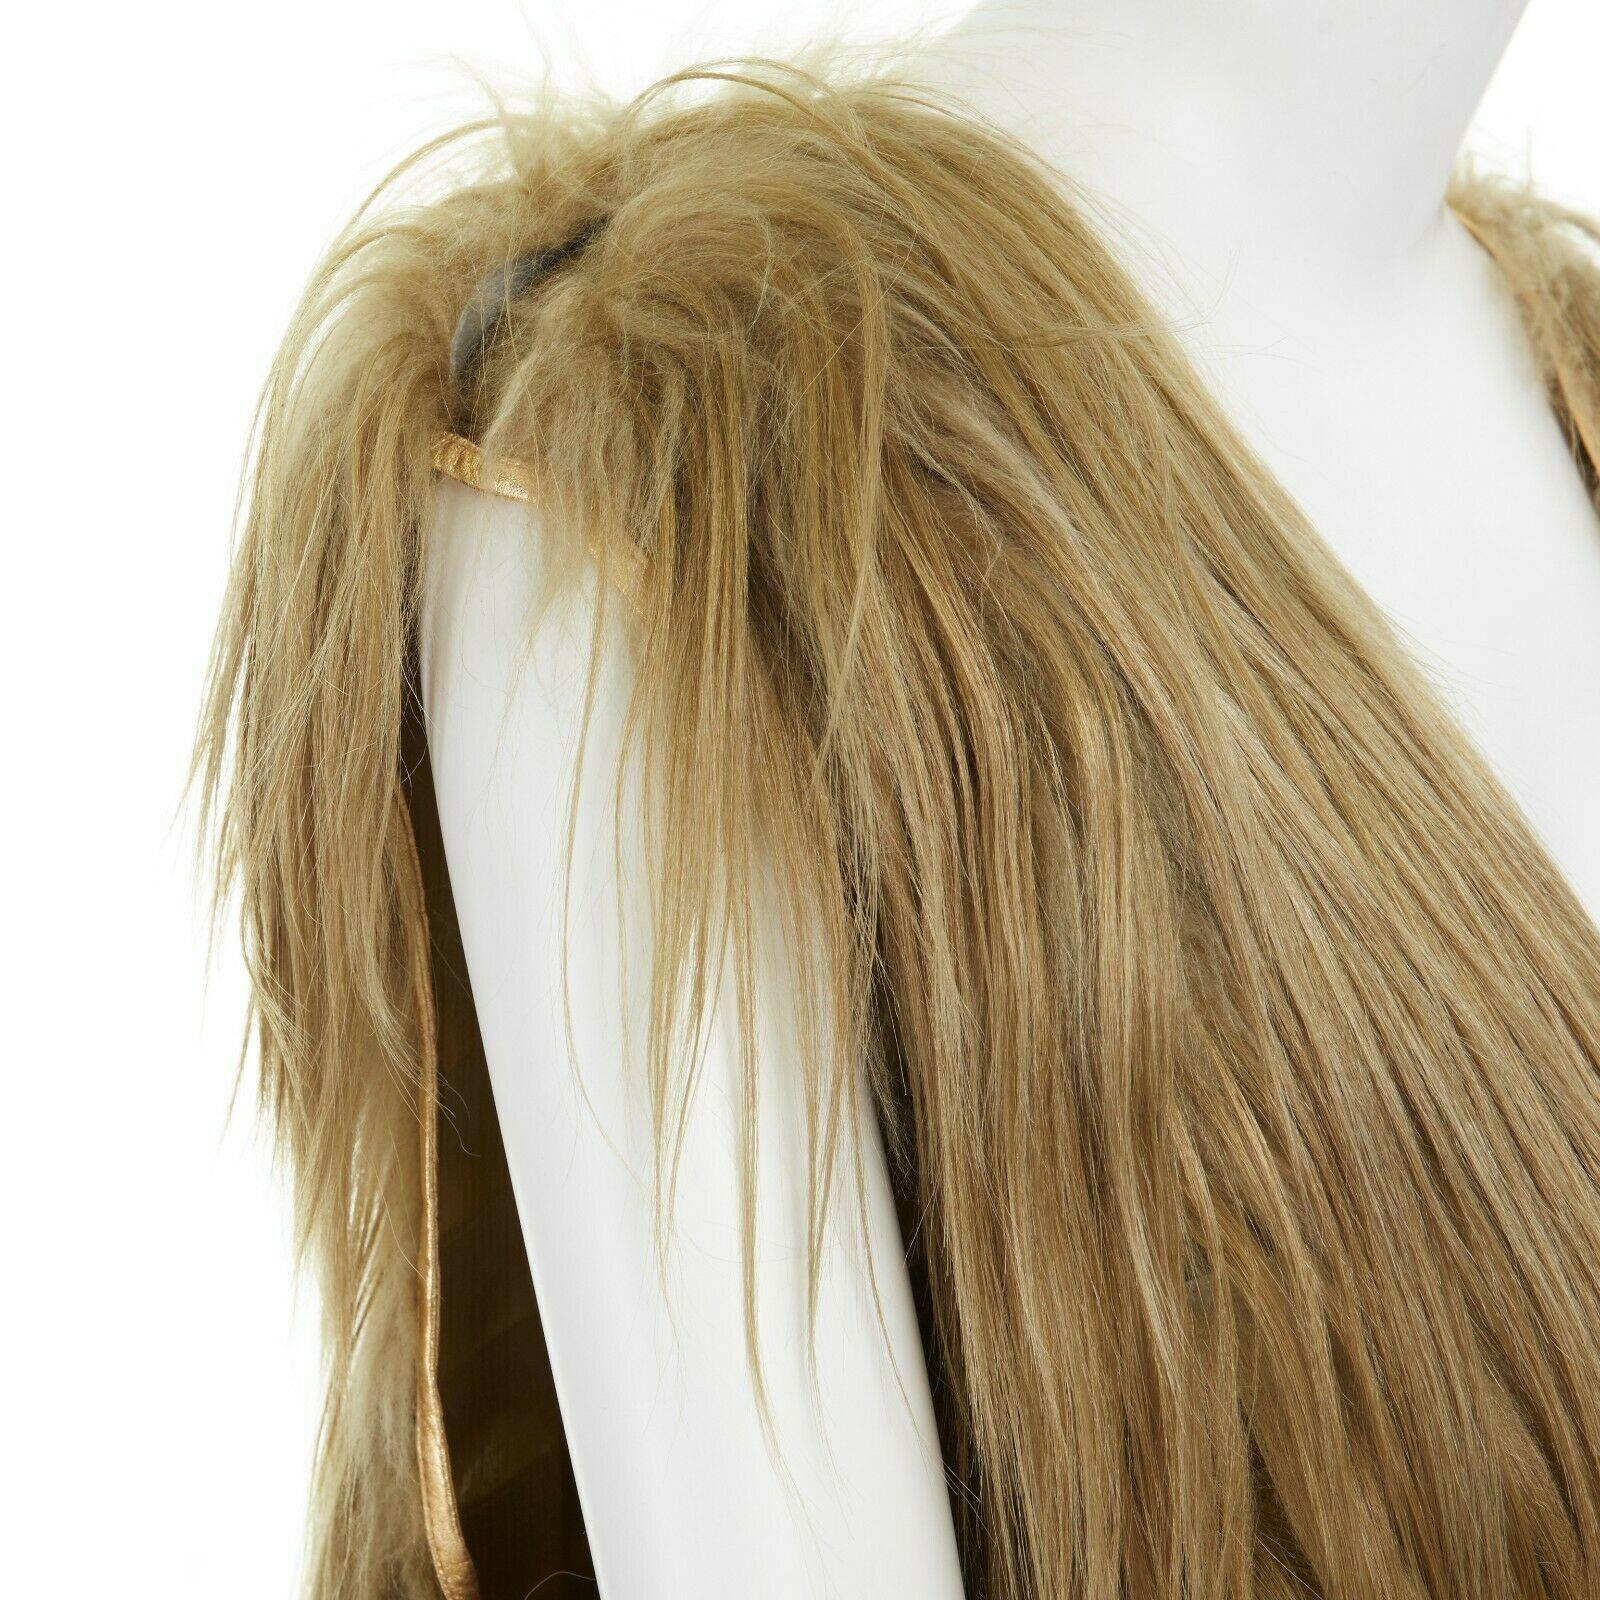 runway PRADA gold genuine long goat fur leather trimmed V-neck shift dress IT38

PRADA
Genuine long goat fur. Gold with green tint. 
V-neck. Gold leather trimming along neckline and sleeves. 
Sleeveless. Oversized boxy fit. Fully lined in silk.